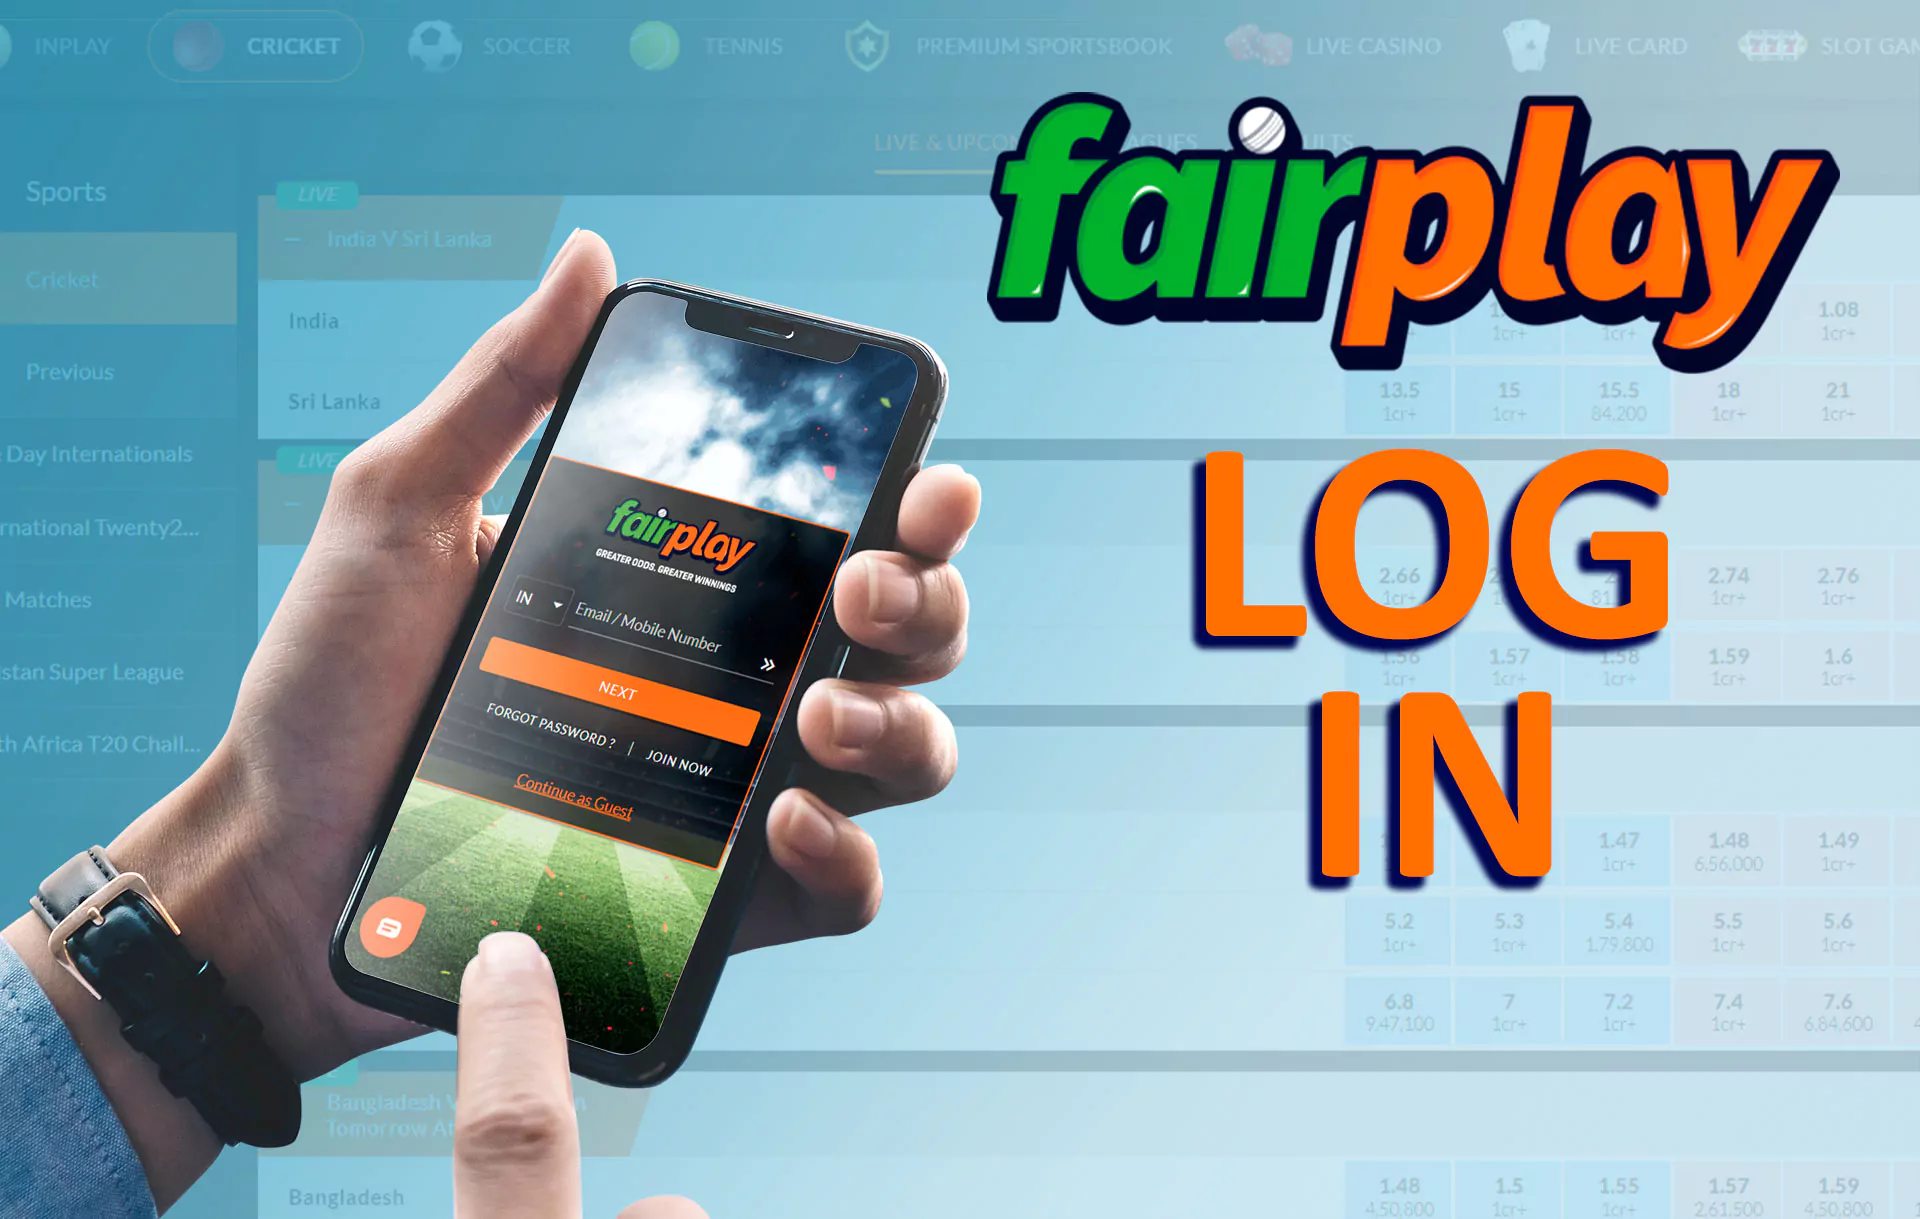 Enter your login and a password to log in to Fairplay app.